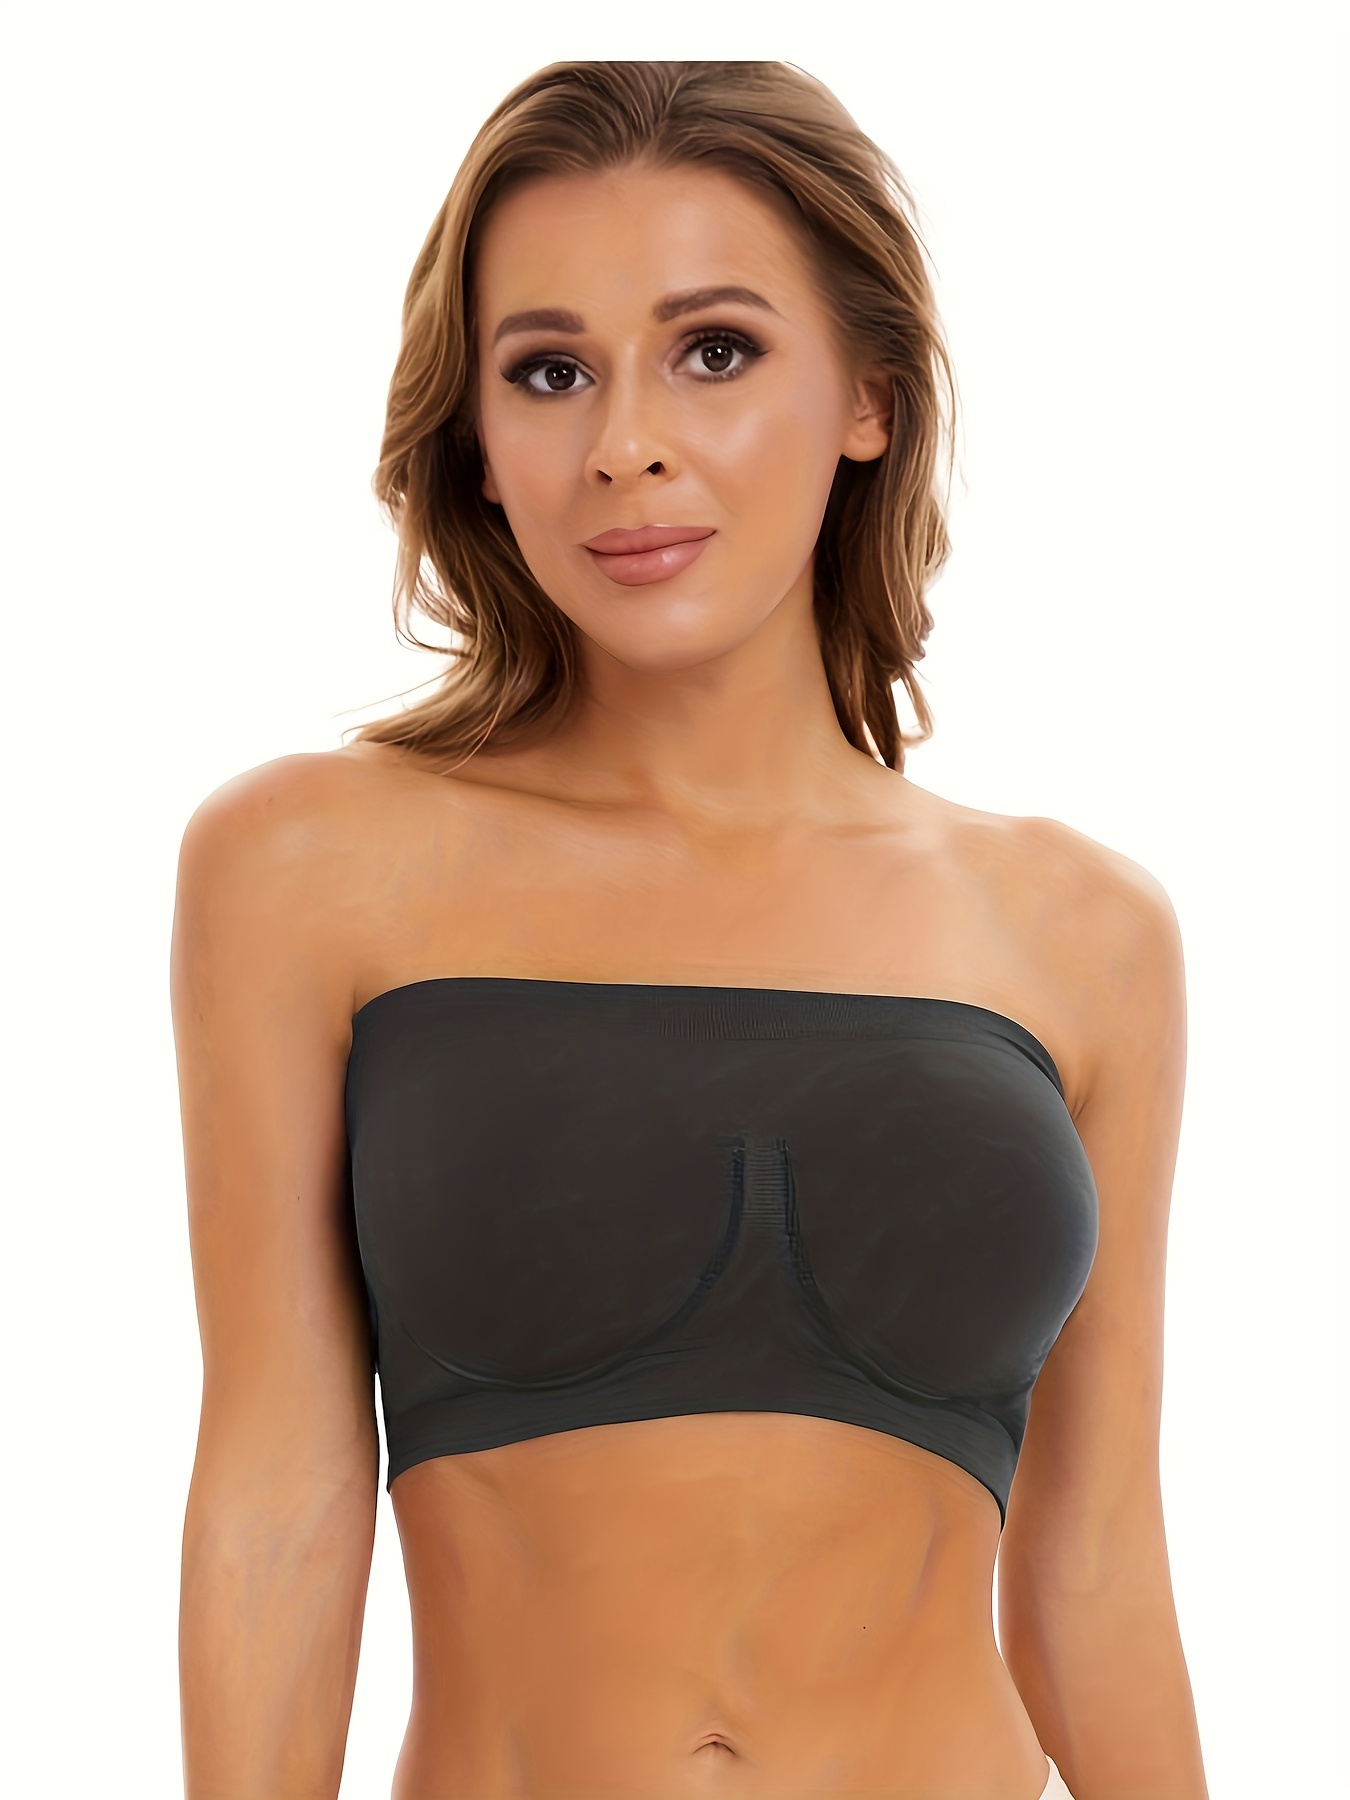 Strapless Bra Seamless Exquisite Underwear Stretchy Appearance Stretchy  Non-Padded Tube Top Bras Good Elasticity Adjustable Lightweight  Underclothes